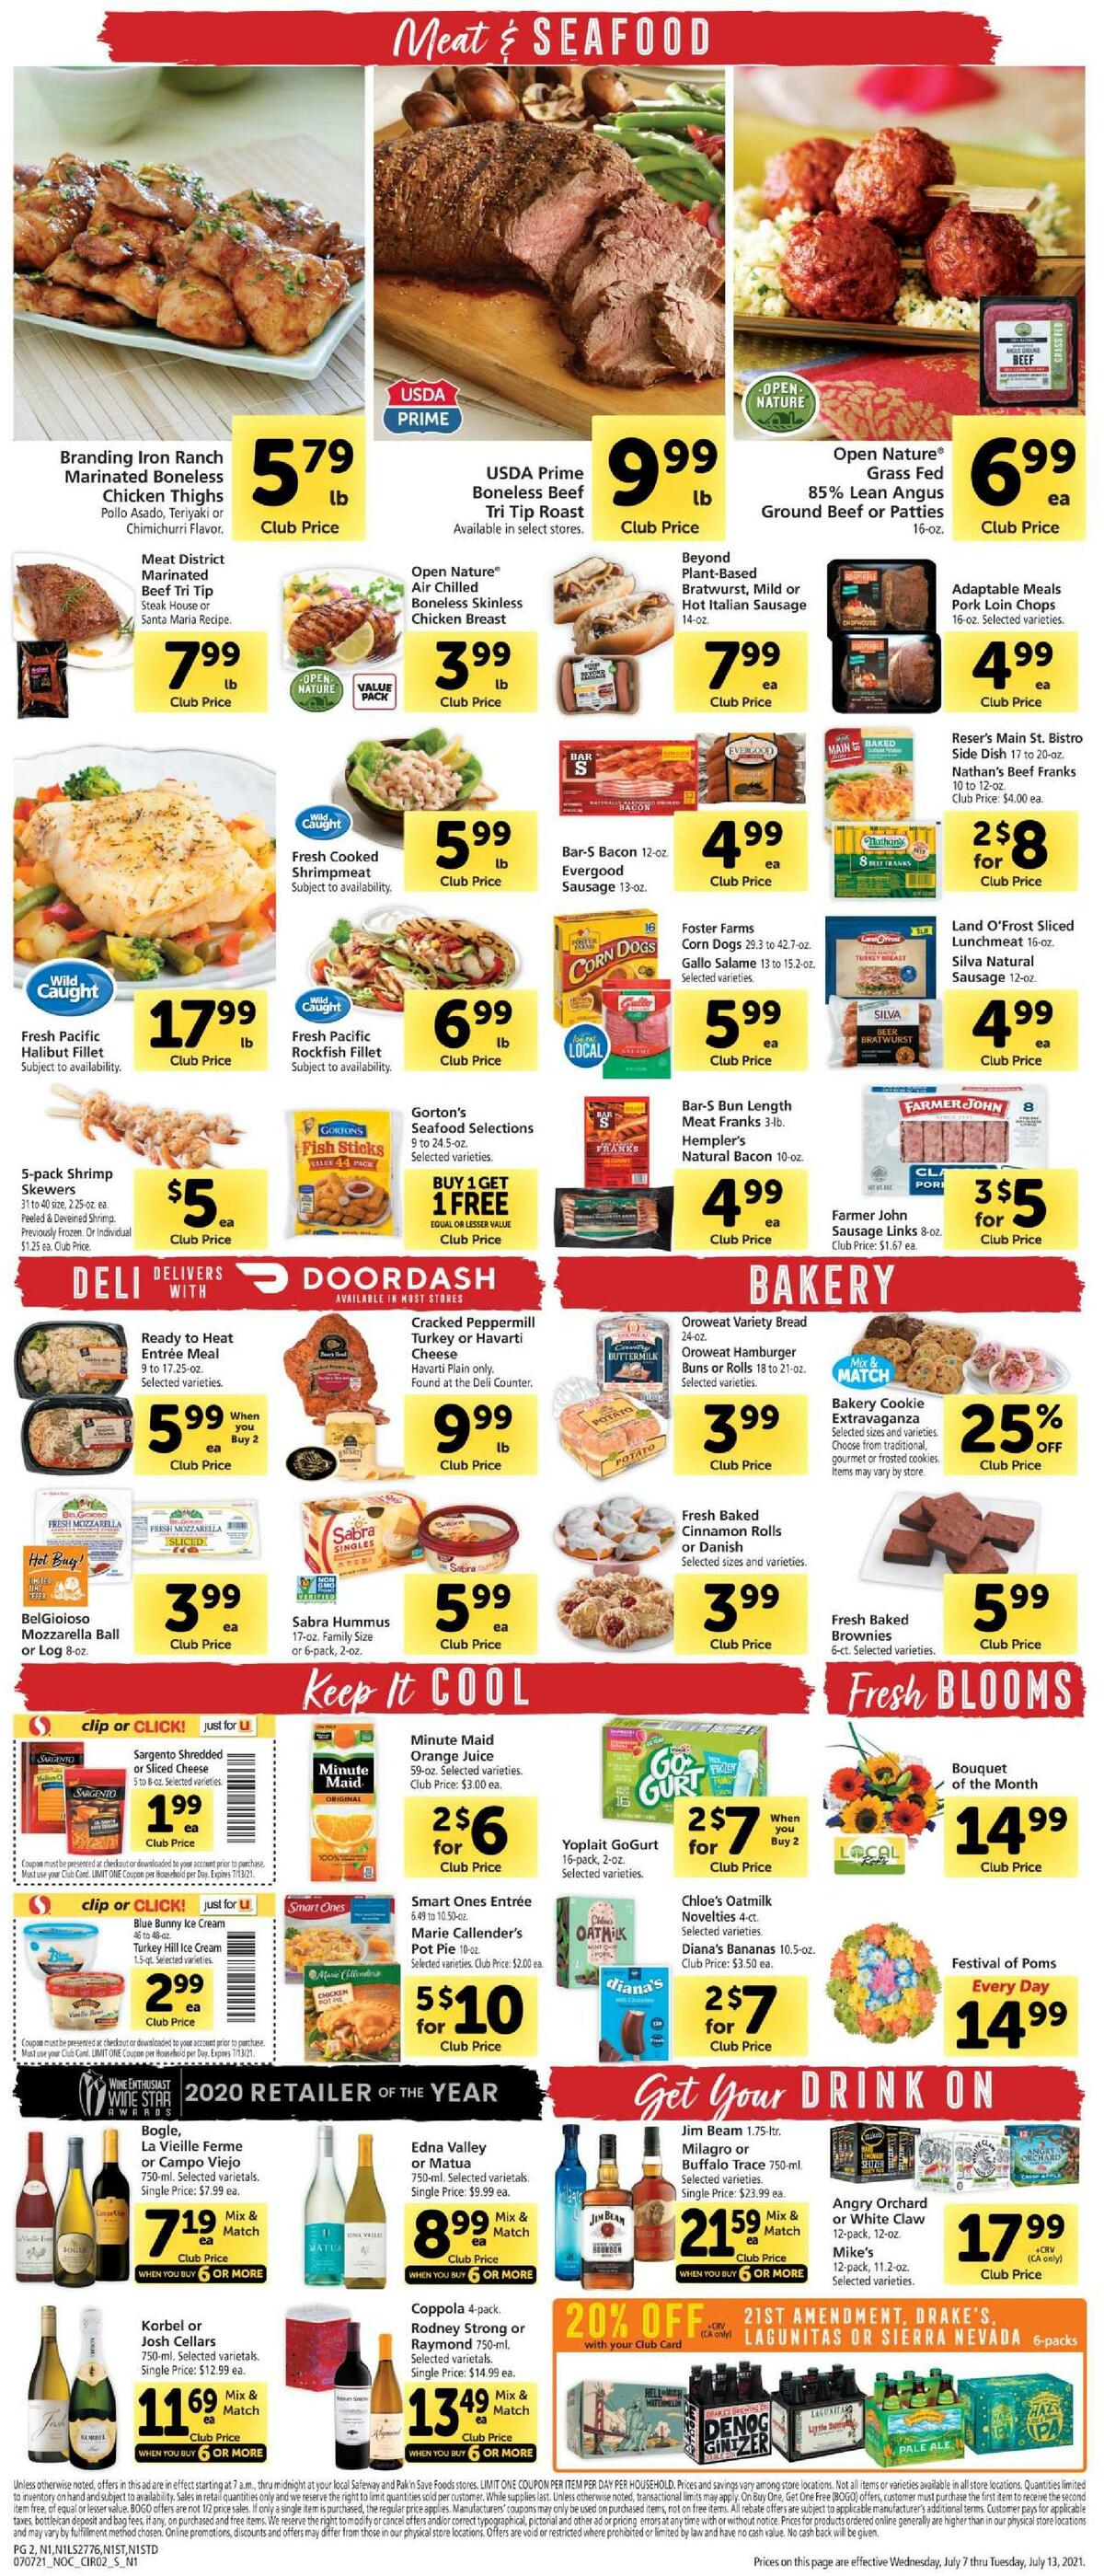 Safeway Weekly Ad from July 7